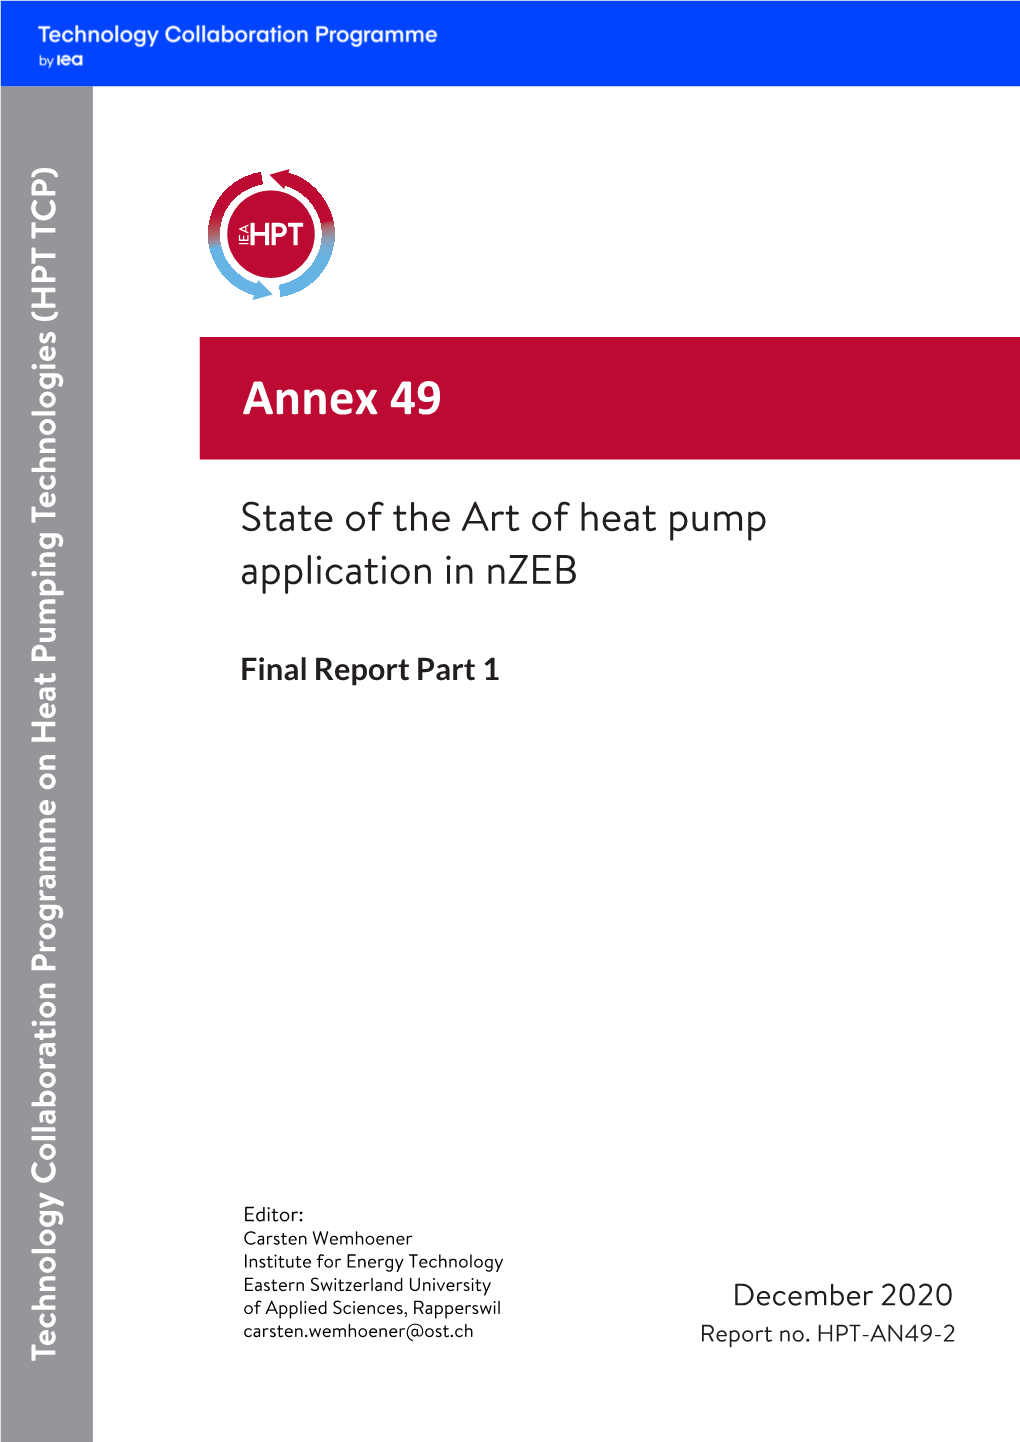 Annex 49 Report Part 1 on the State-Of-The-Art of Heat Pumps in Nzeb